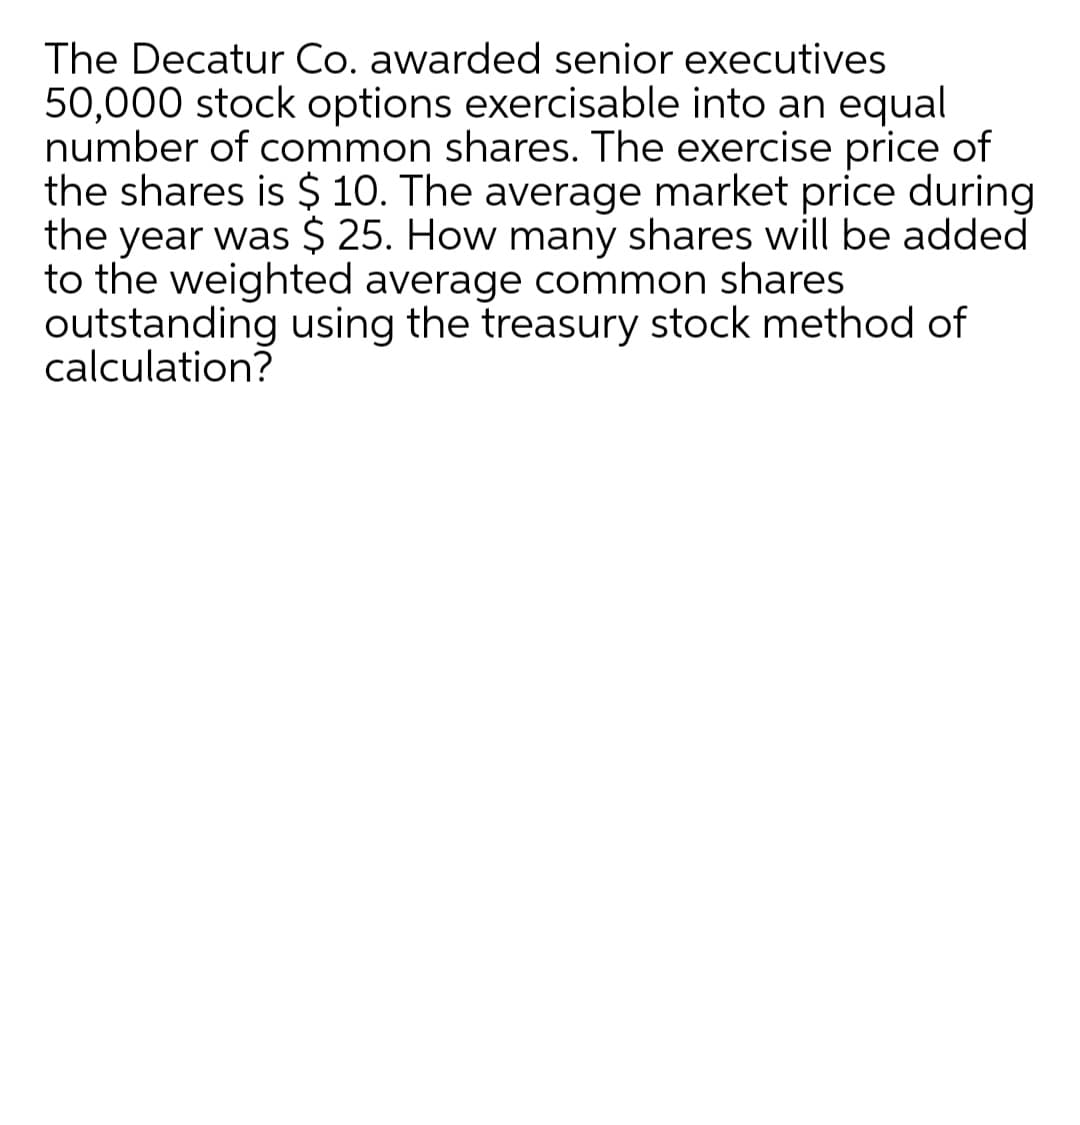 The Decatur Co. awarded senior executives
50,000 stock options exercisable into an equal
number of common shares. The exercise price of
the shares is $ 10. The average market price during
the year was $ 25. How many shares will be added
to the weighted average common shares
outstanding using the treasury stock method of
calculation?
